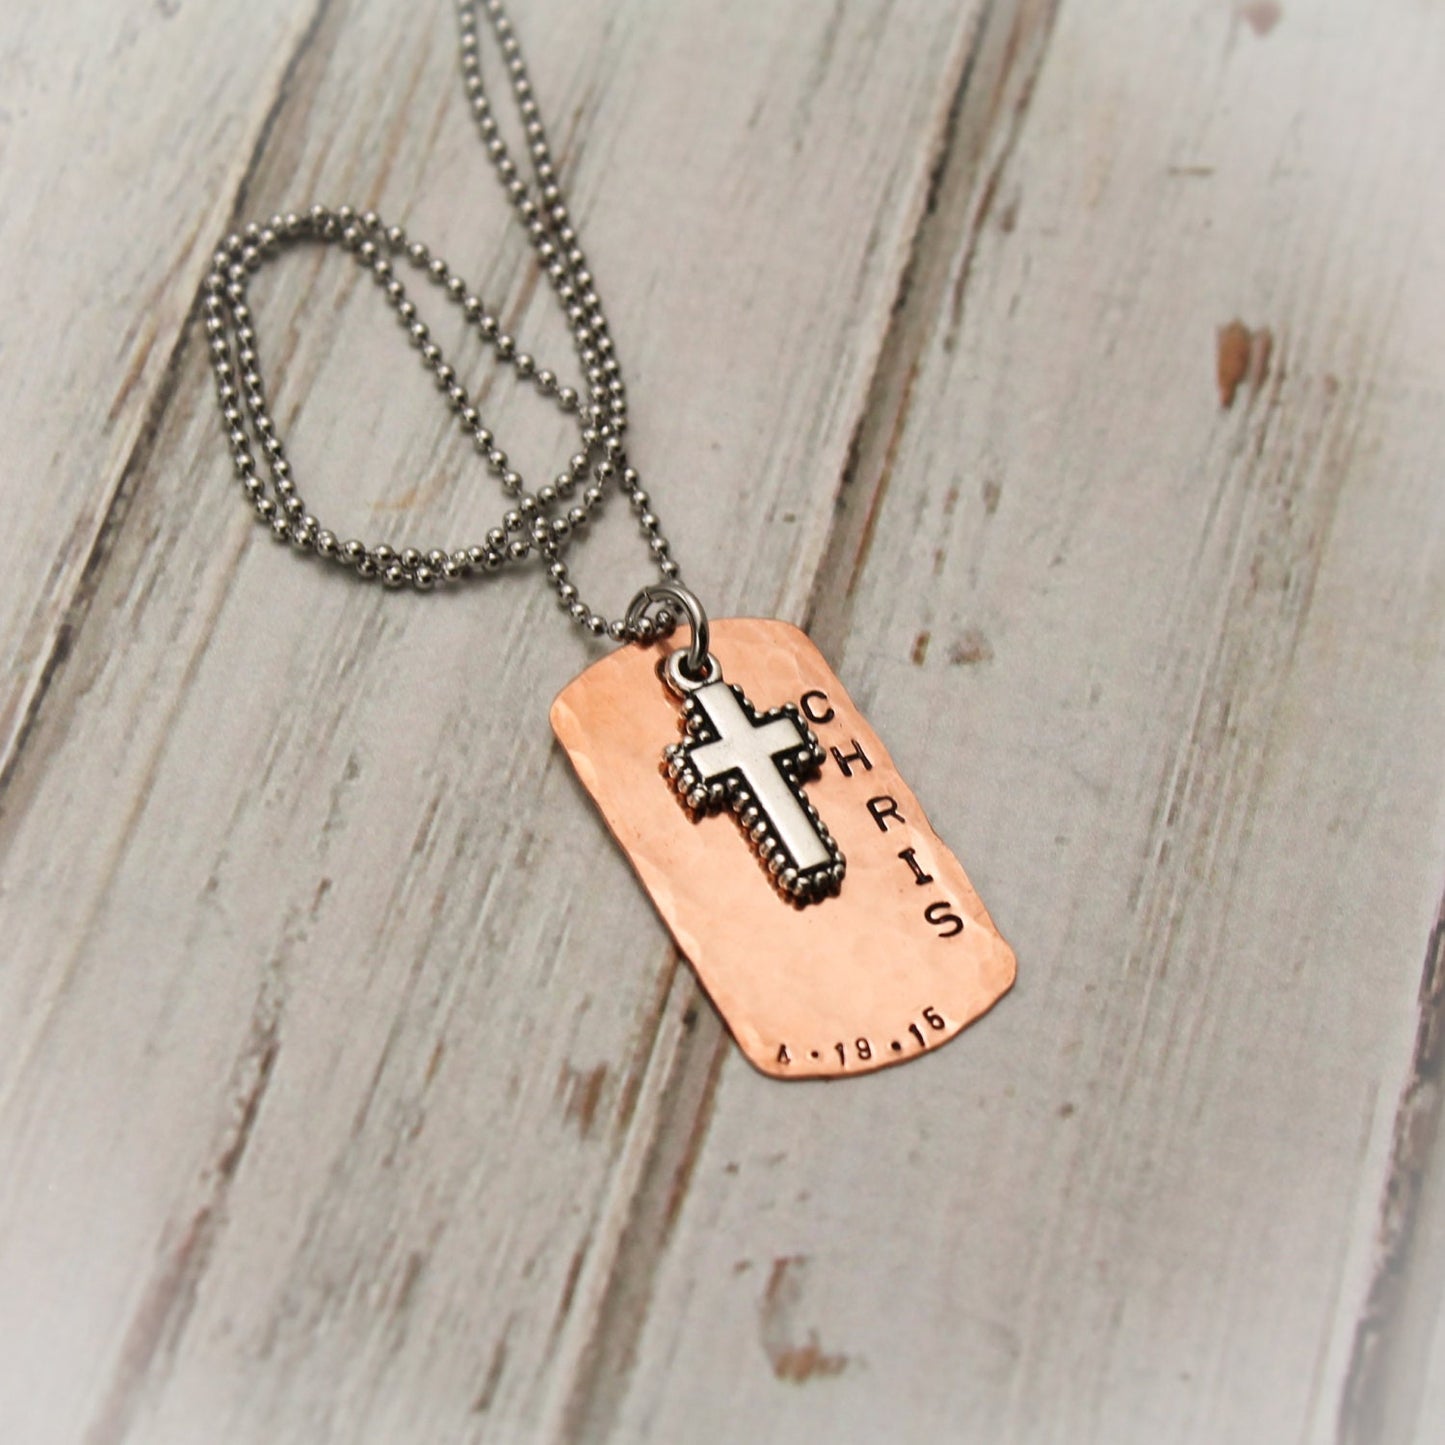 Boys Cross Necklace,First Communion Gift, Copper Dog Tag Cross Necklace for Boys,  Personalized